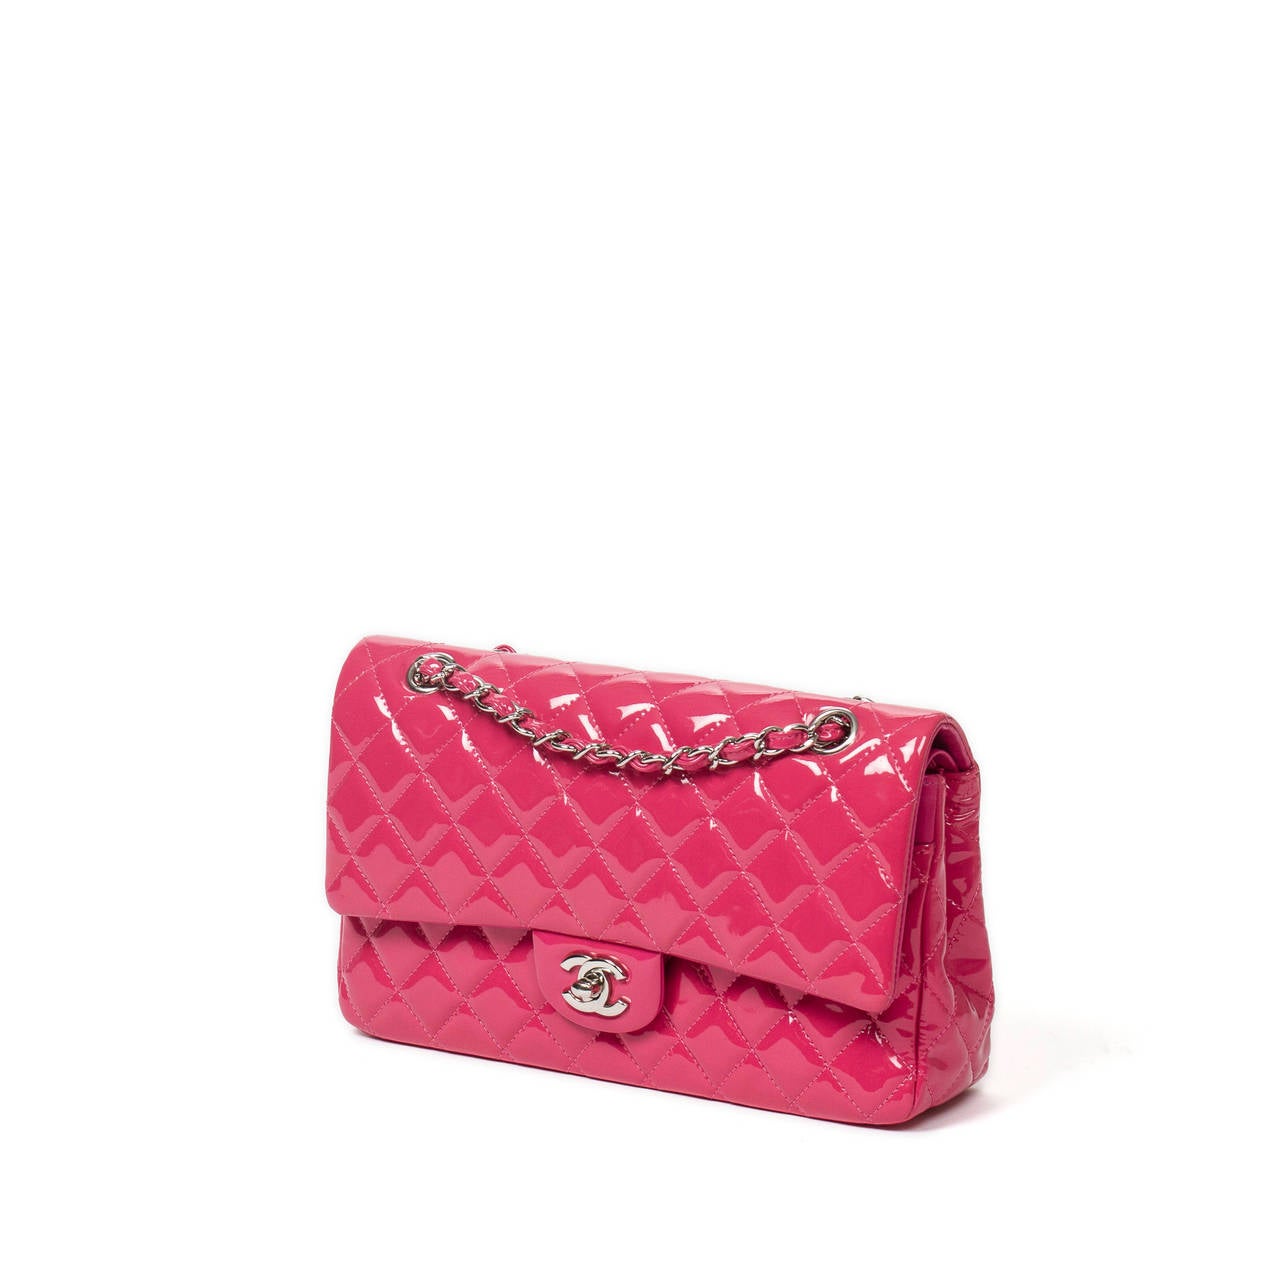 Chanel Classic double flap 26cm in pink quilted patent leather with double chain strap interlaced with pink leather, CC turnlock and silver tone hardware. Interior lined in pink leather with 3 slip pockets. Dustbag, sitcker and authentiticty card